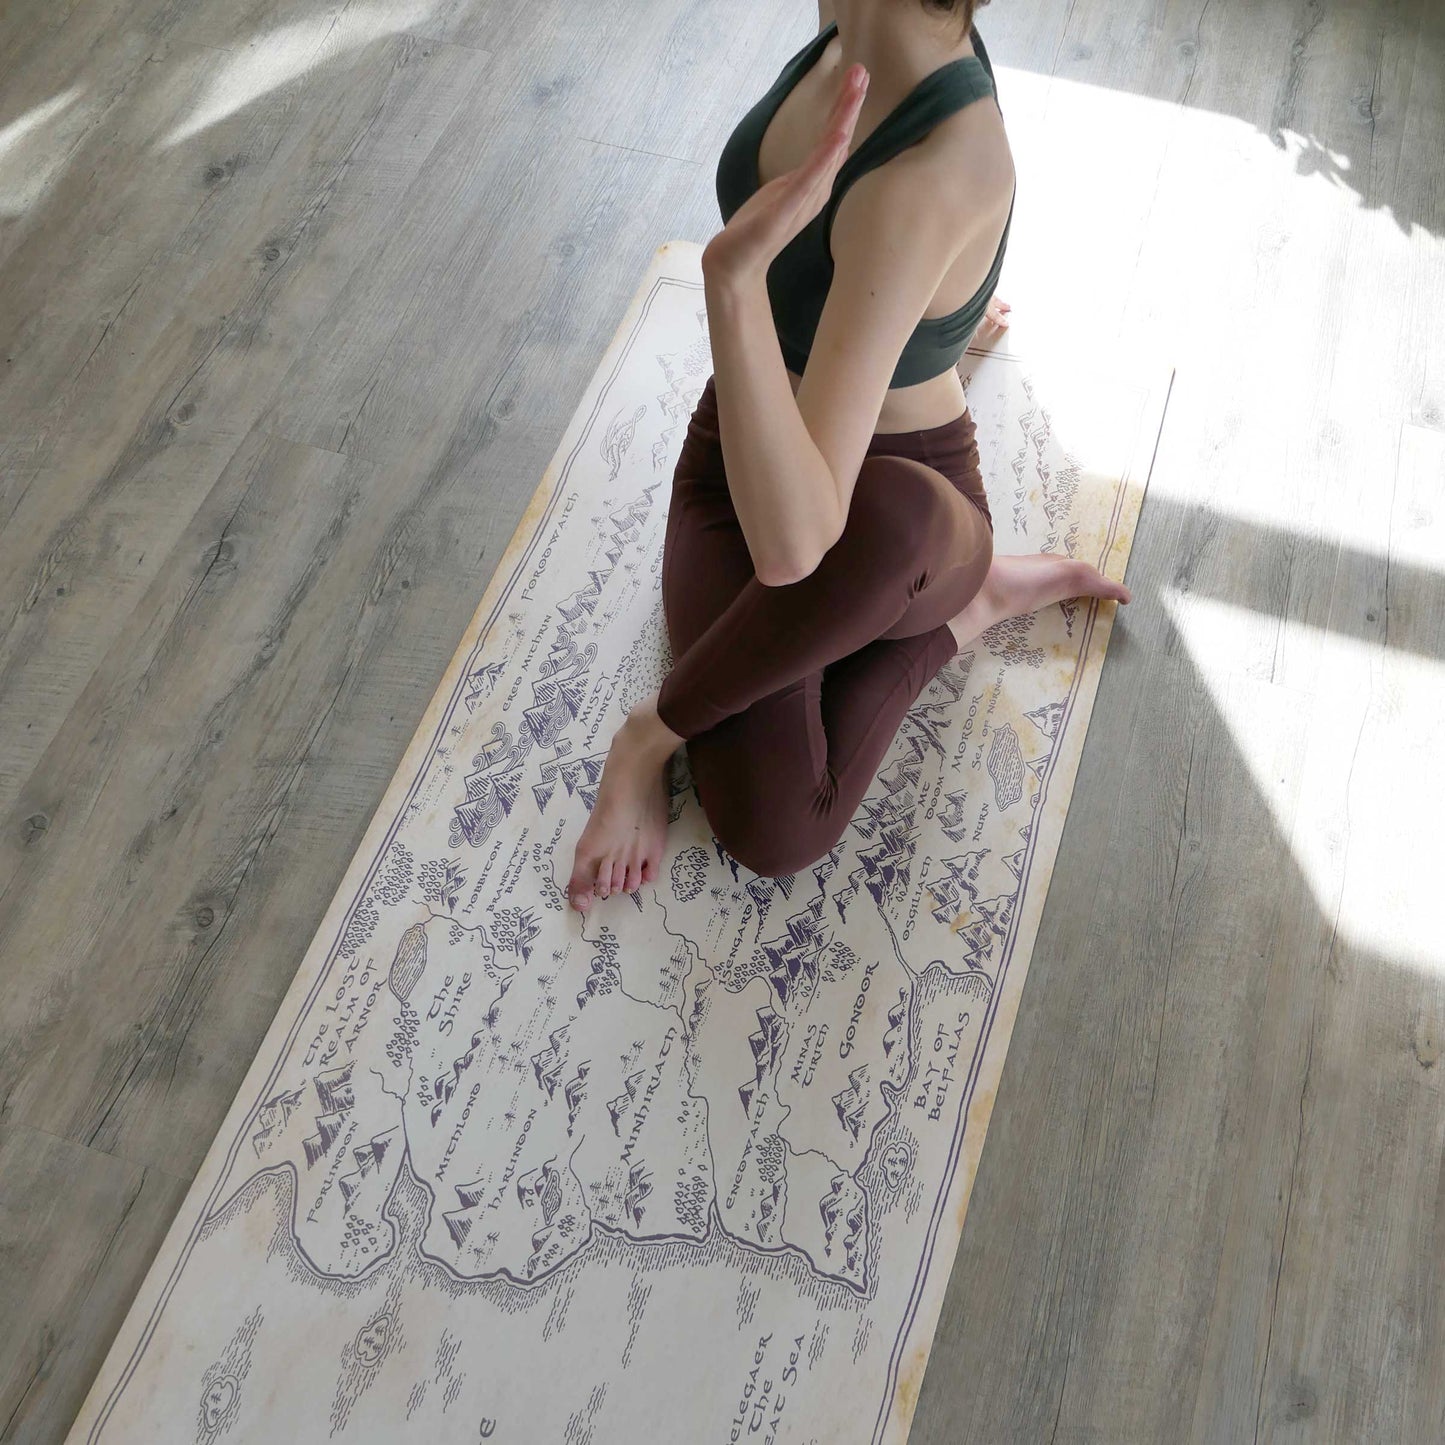 Realm of MIDDLE-EARTH™ Yoga Mat